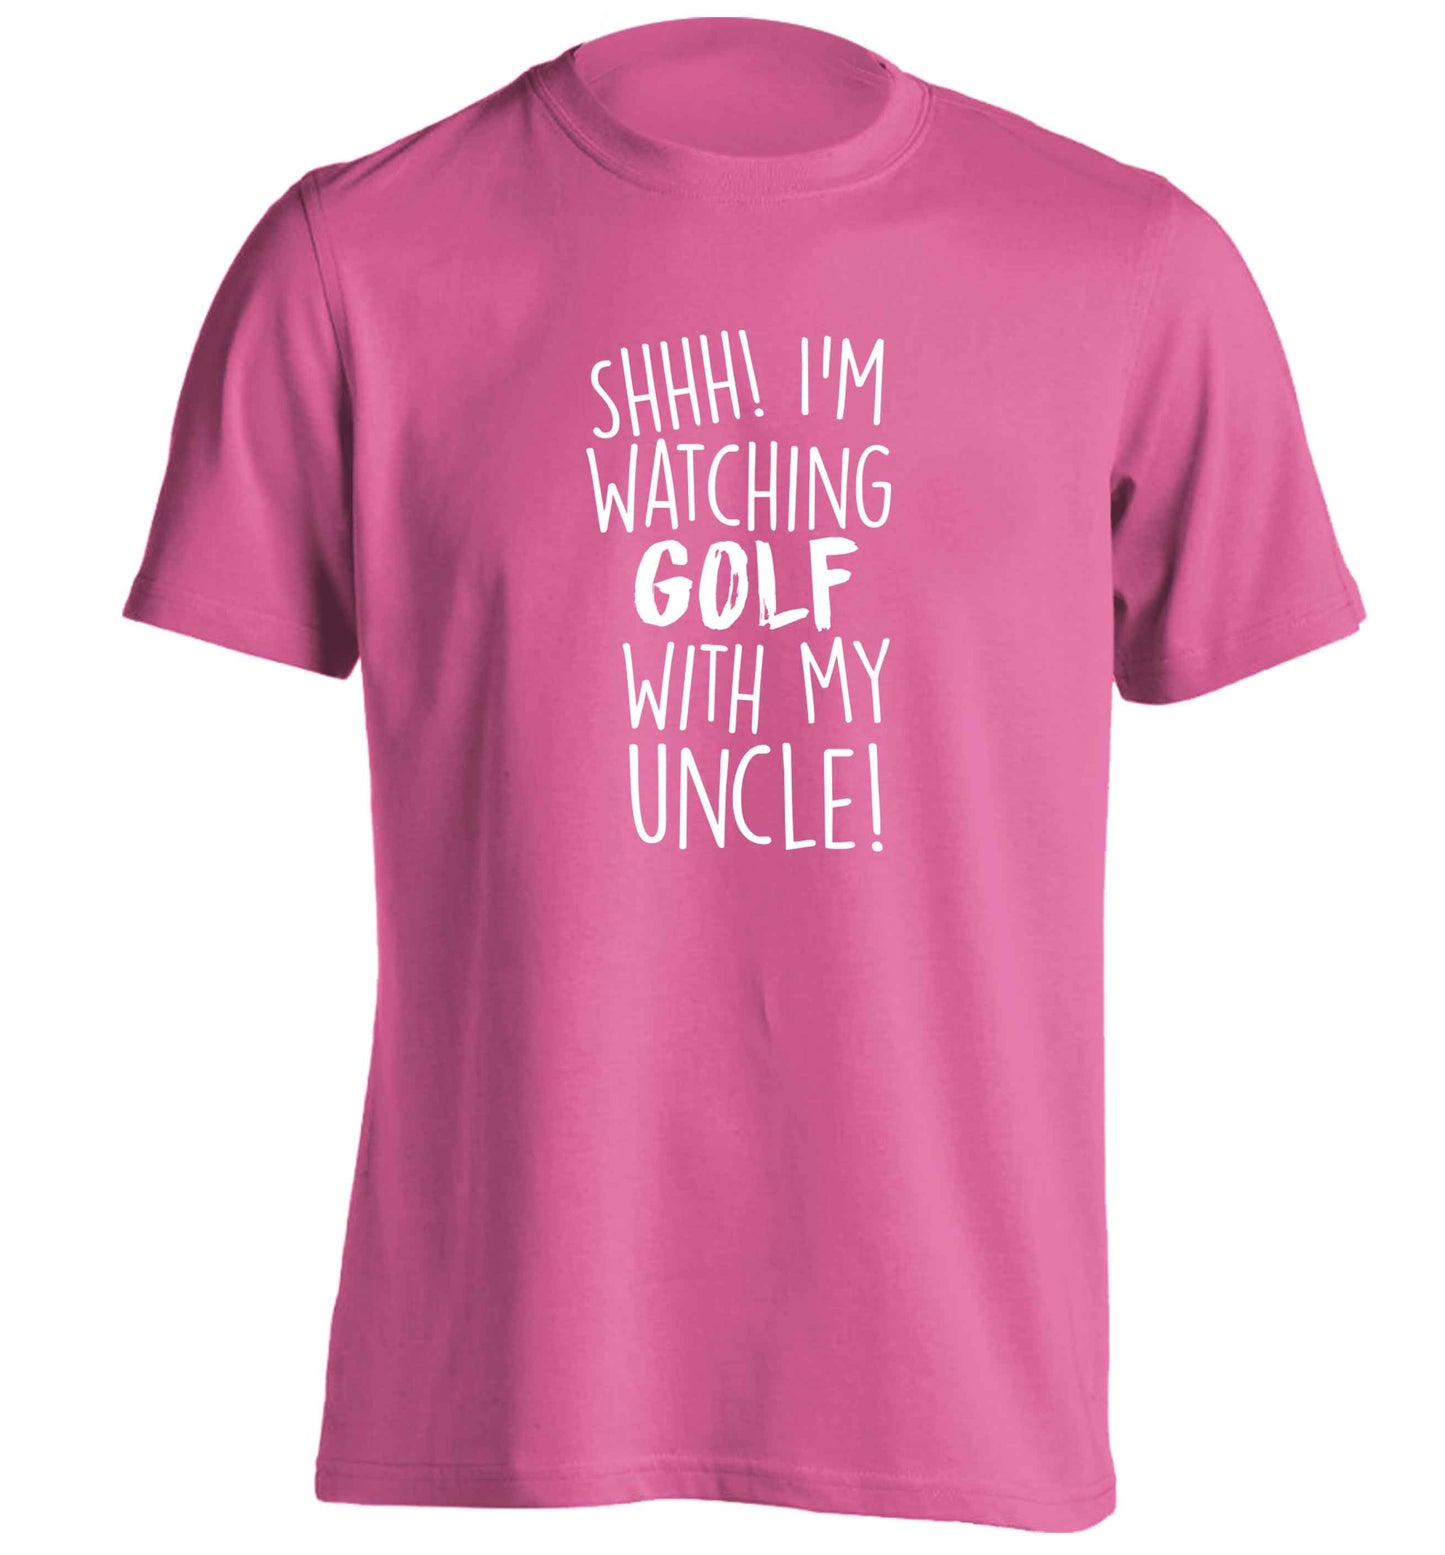 Shh I'm watching golf with my uncle adults unisex pink Tshirt 2XL